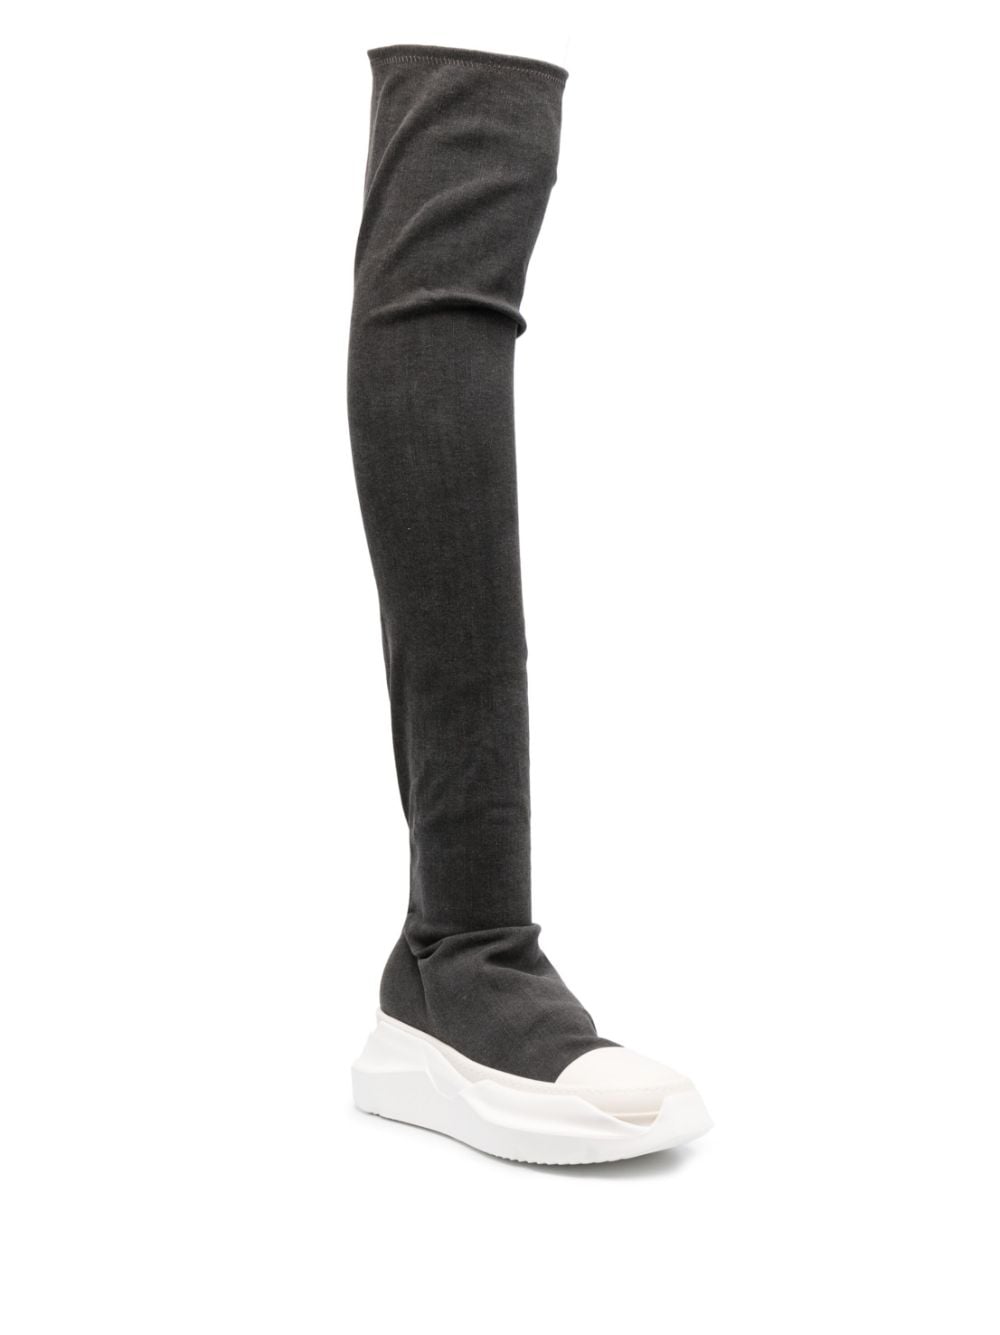 Image 2 of Rick Owens DRKSHDW Abstract Stockings denim boots